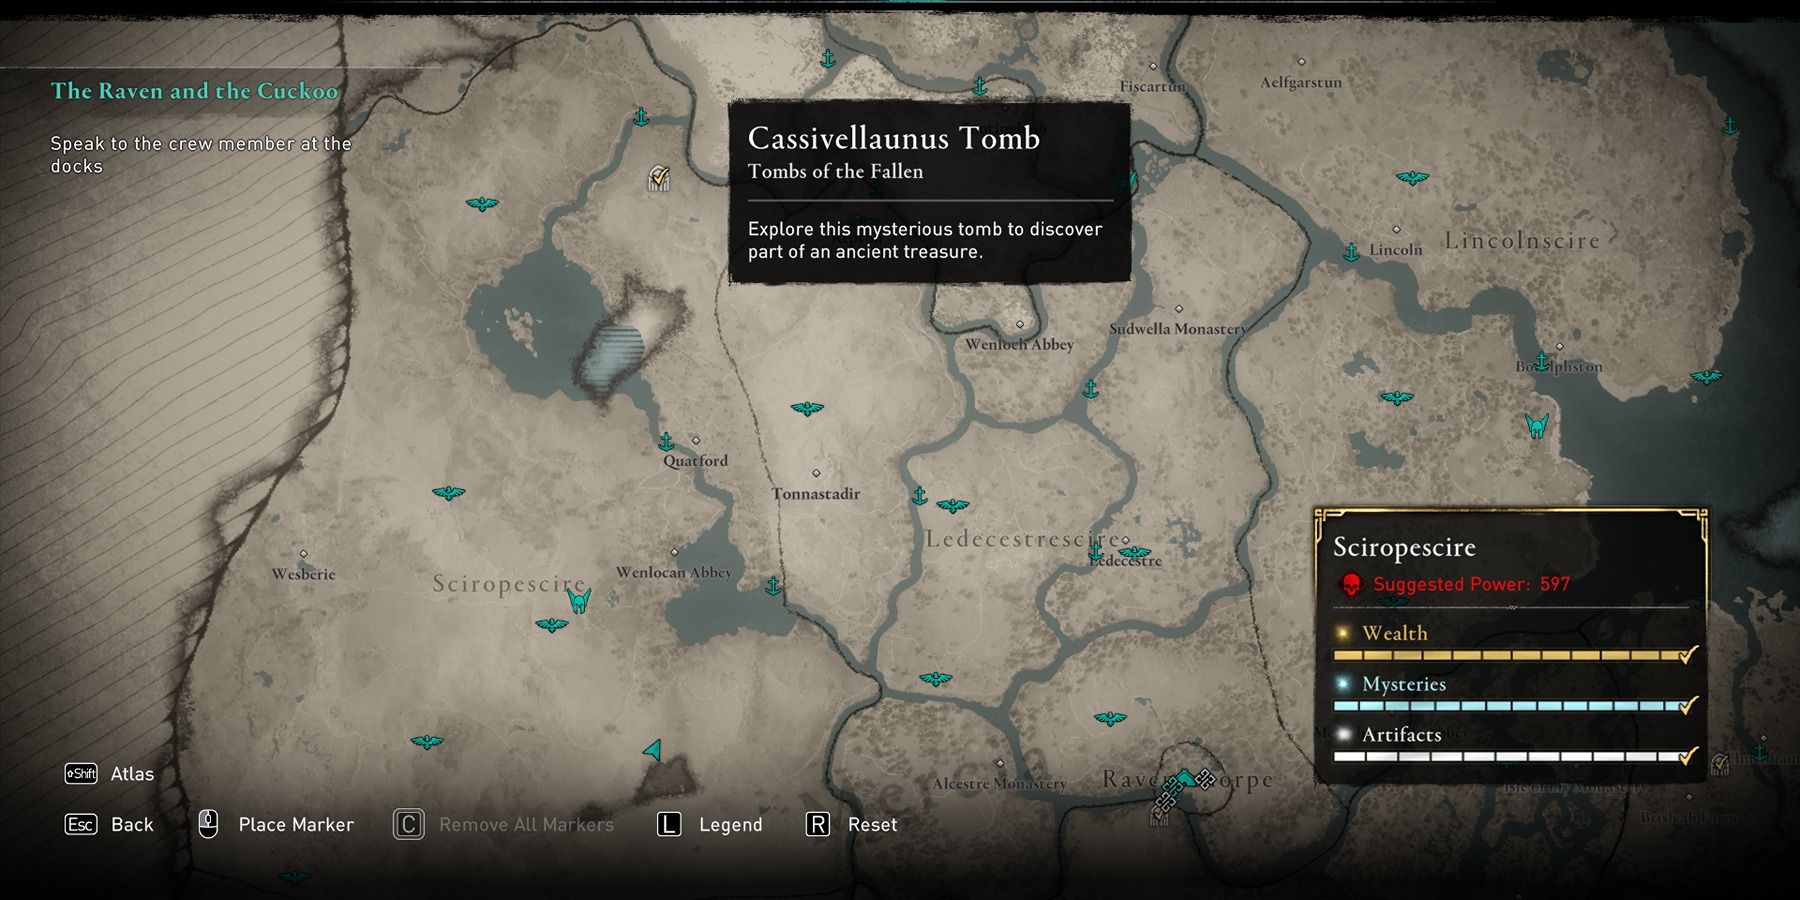 Cassivellauinus Tomb location highlighted on map in Assassin's Creed Valhalla